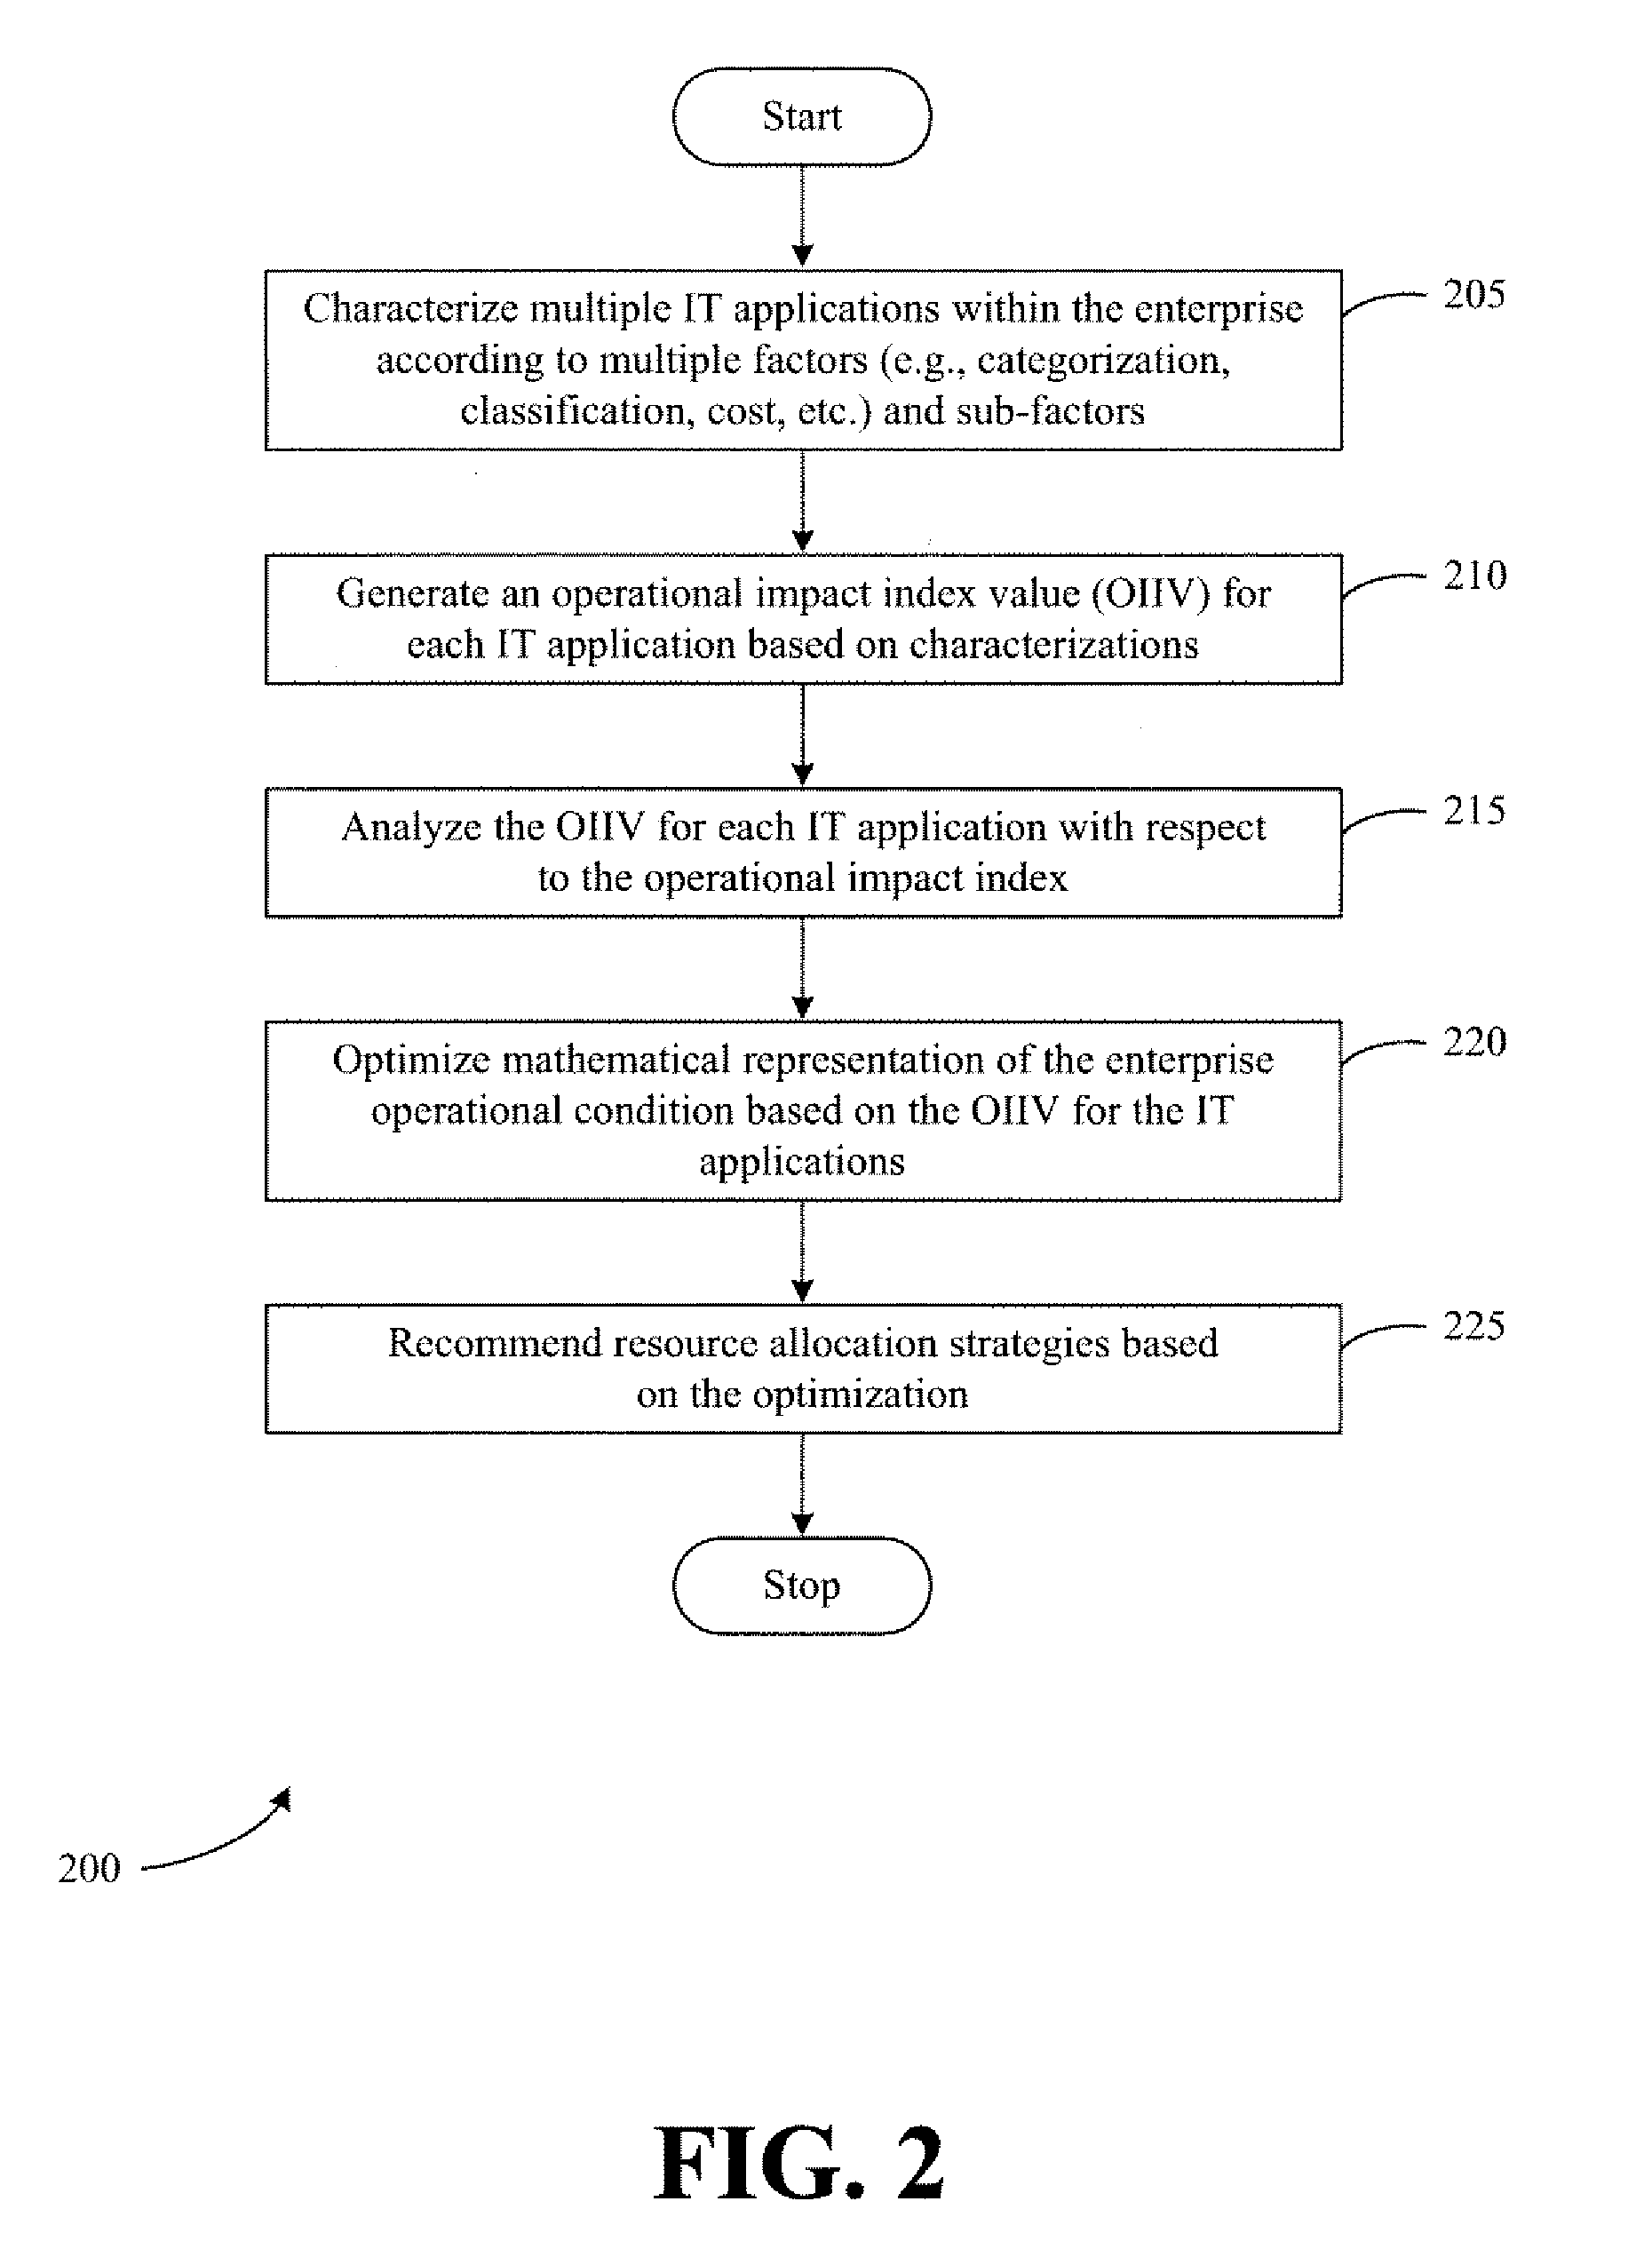 Systems and Methods for Facilitating Information Technology Assessments